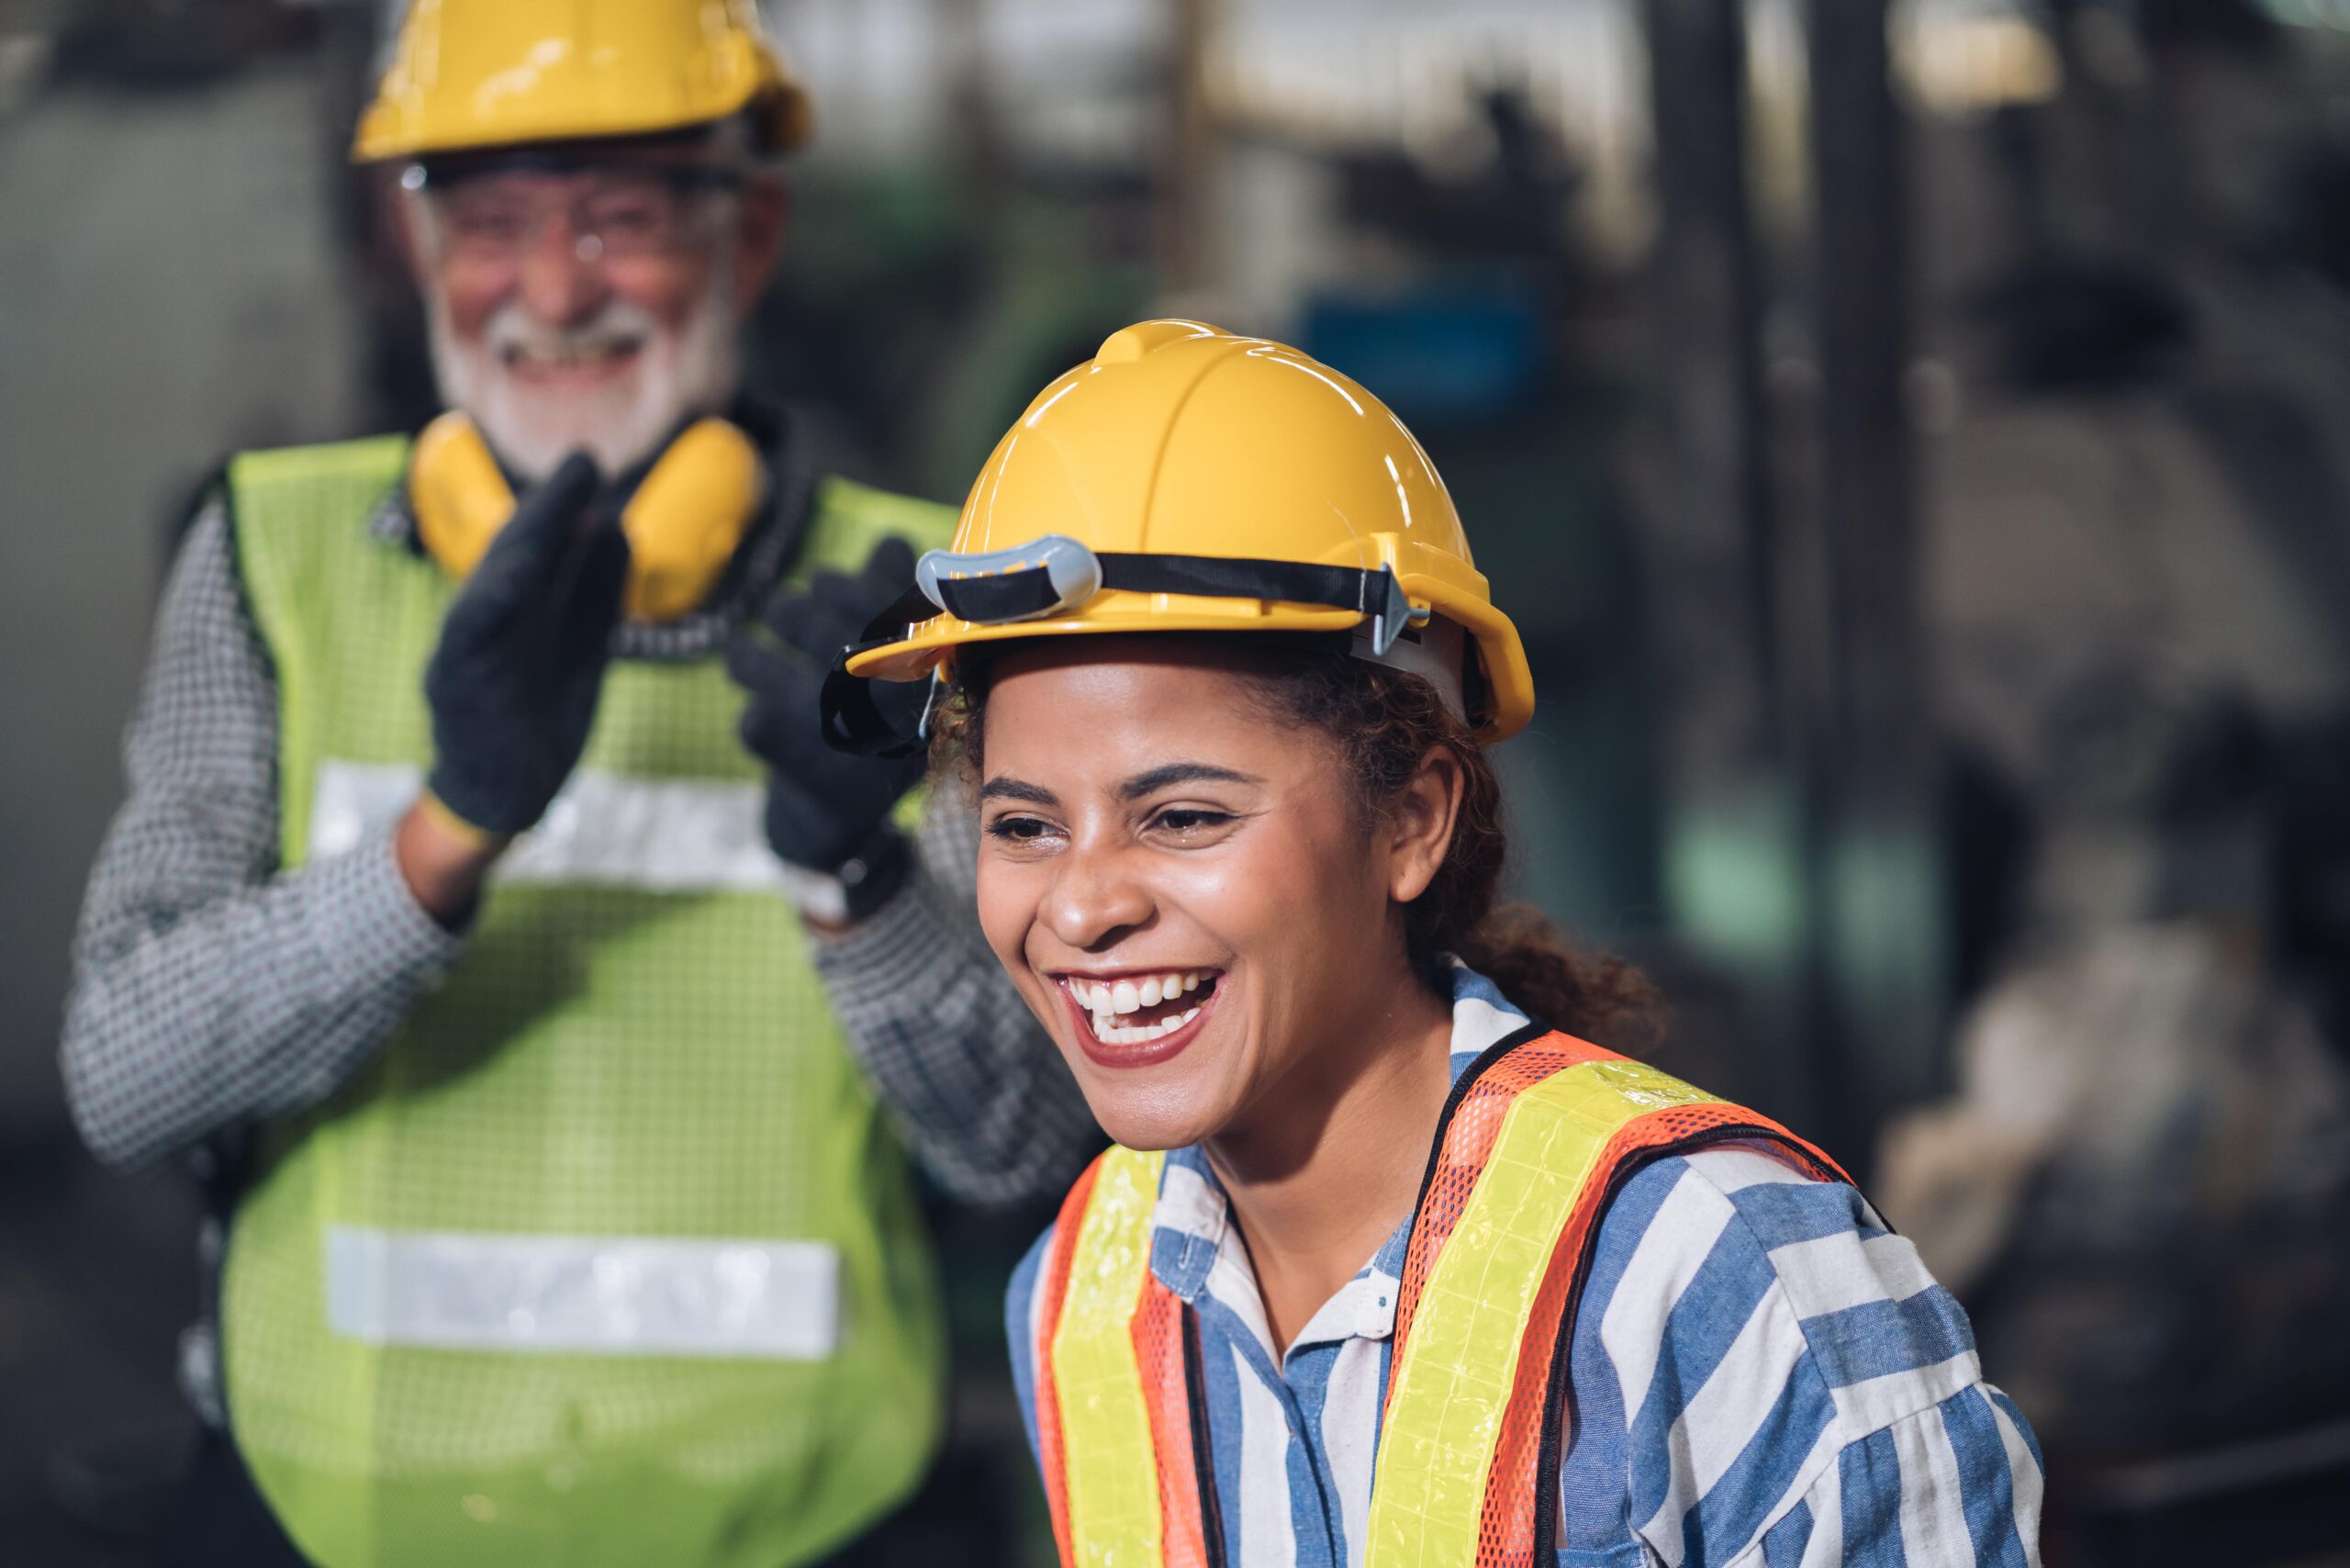 construction worker employee happy to be at work